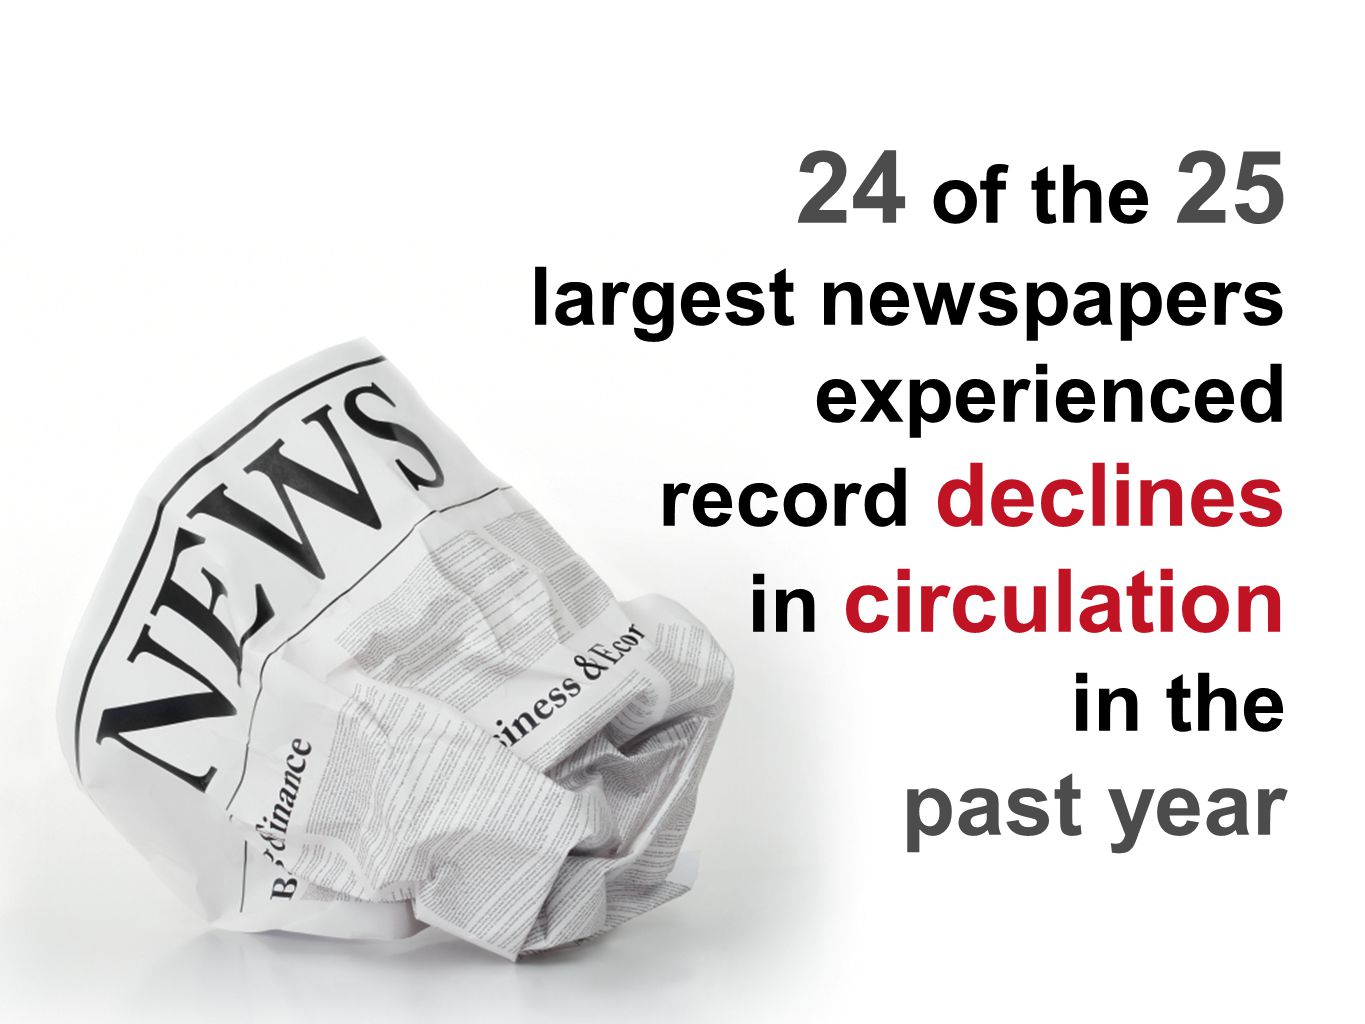 24 of the 25 largest newspapers experienced record declines in circulation in the past year